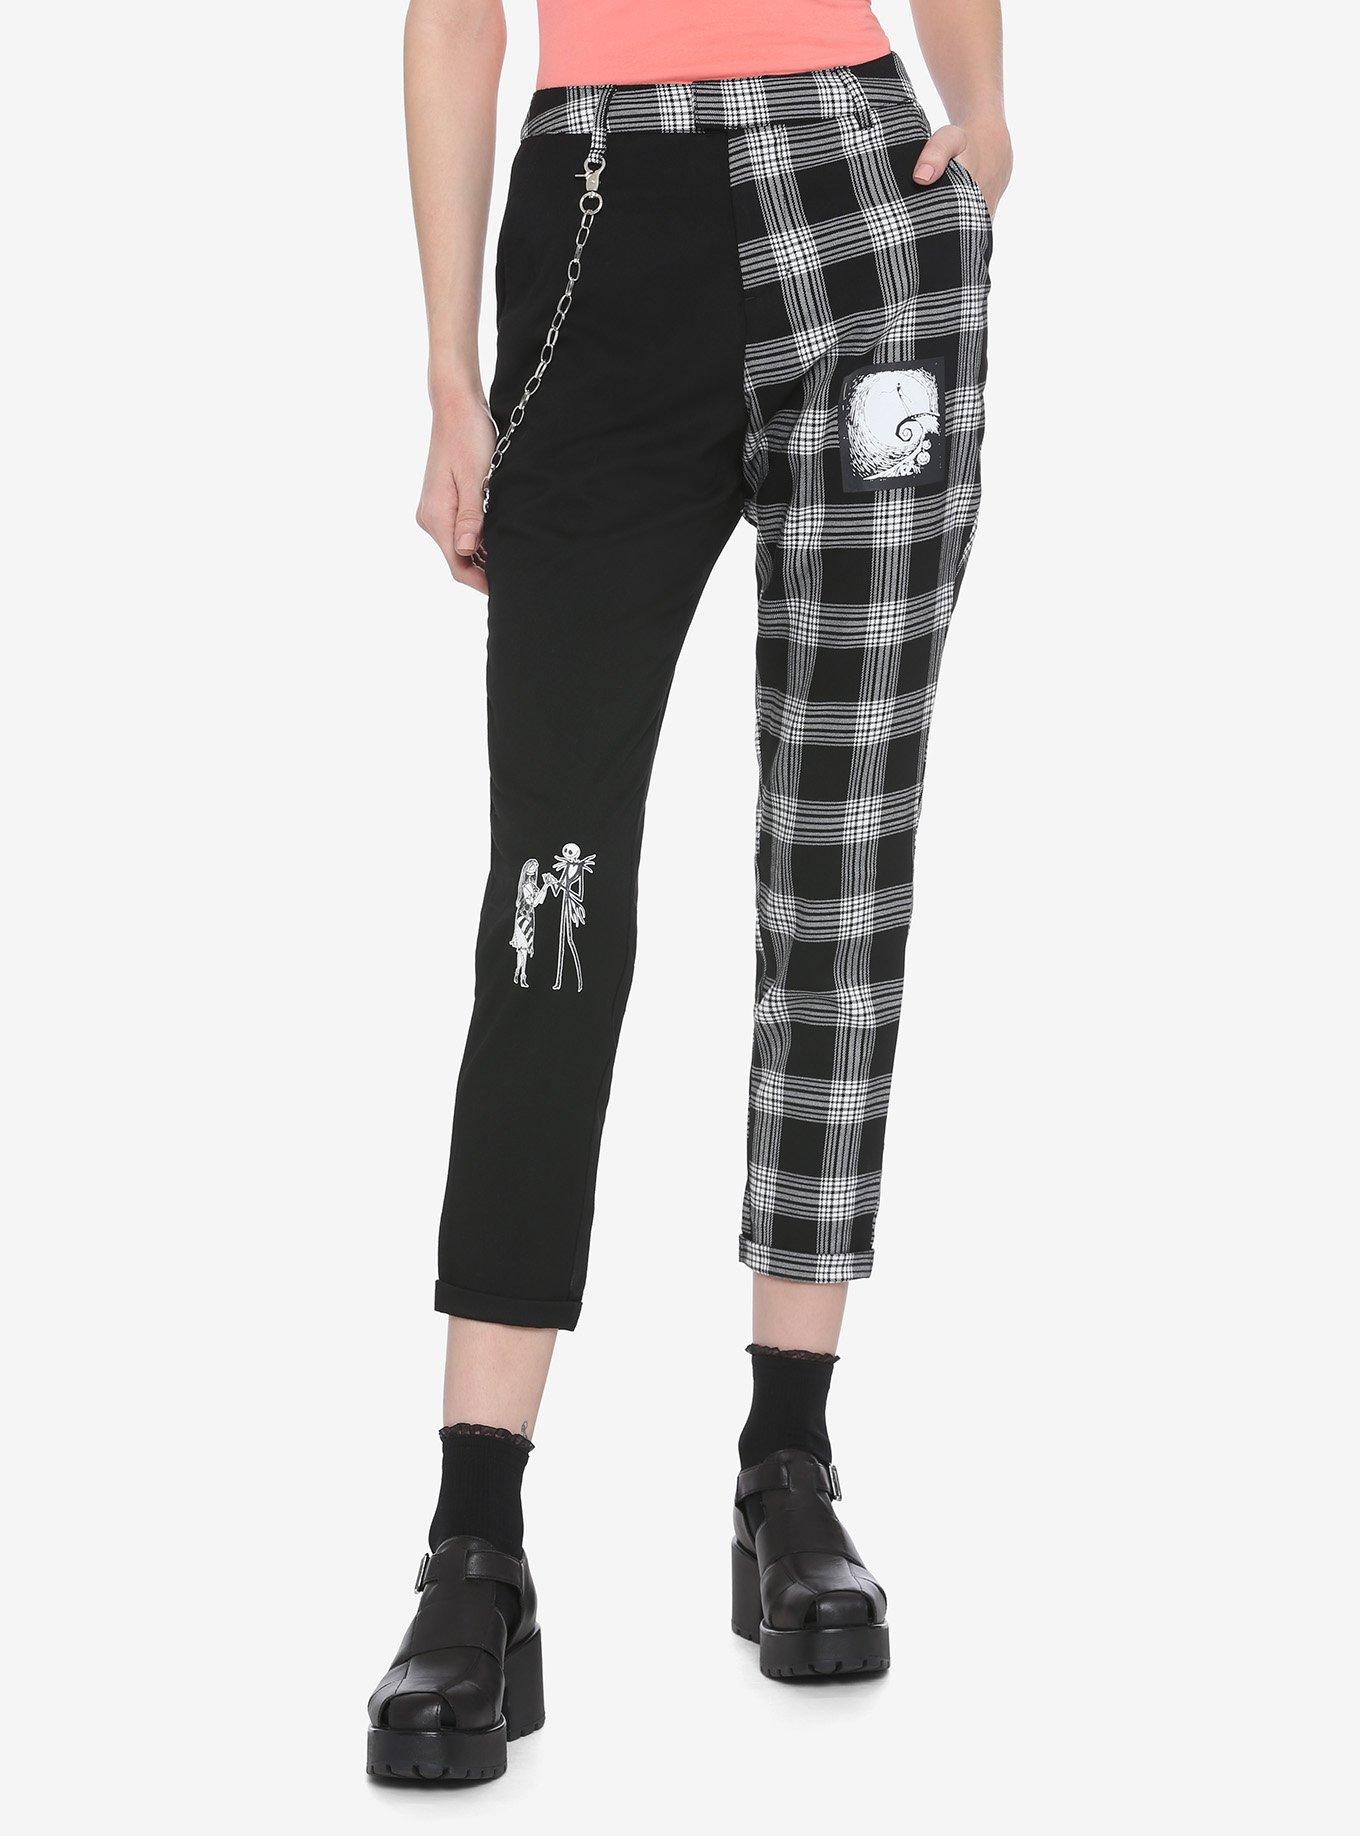 Hot Topic Womens Blue Plaid Suspender Pants Trouser Punk Cosplay Academia  XS 